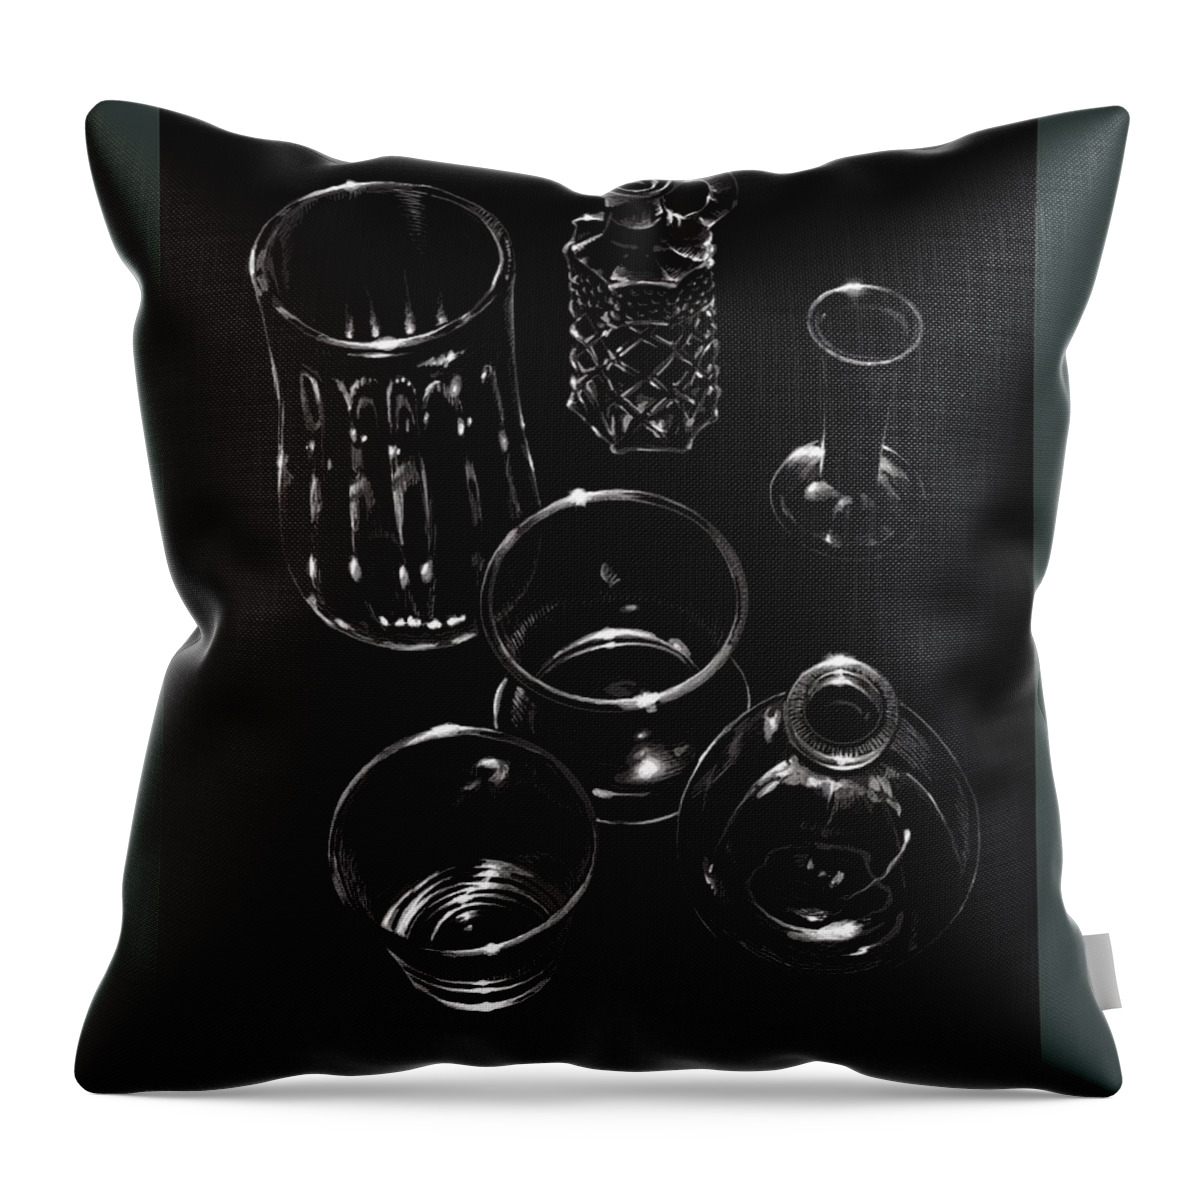 Black Throw Pillow featuring the digital art Glassware 1 by Don Morgan